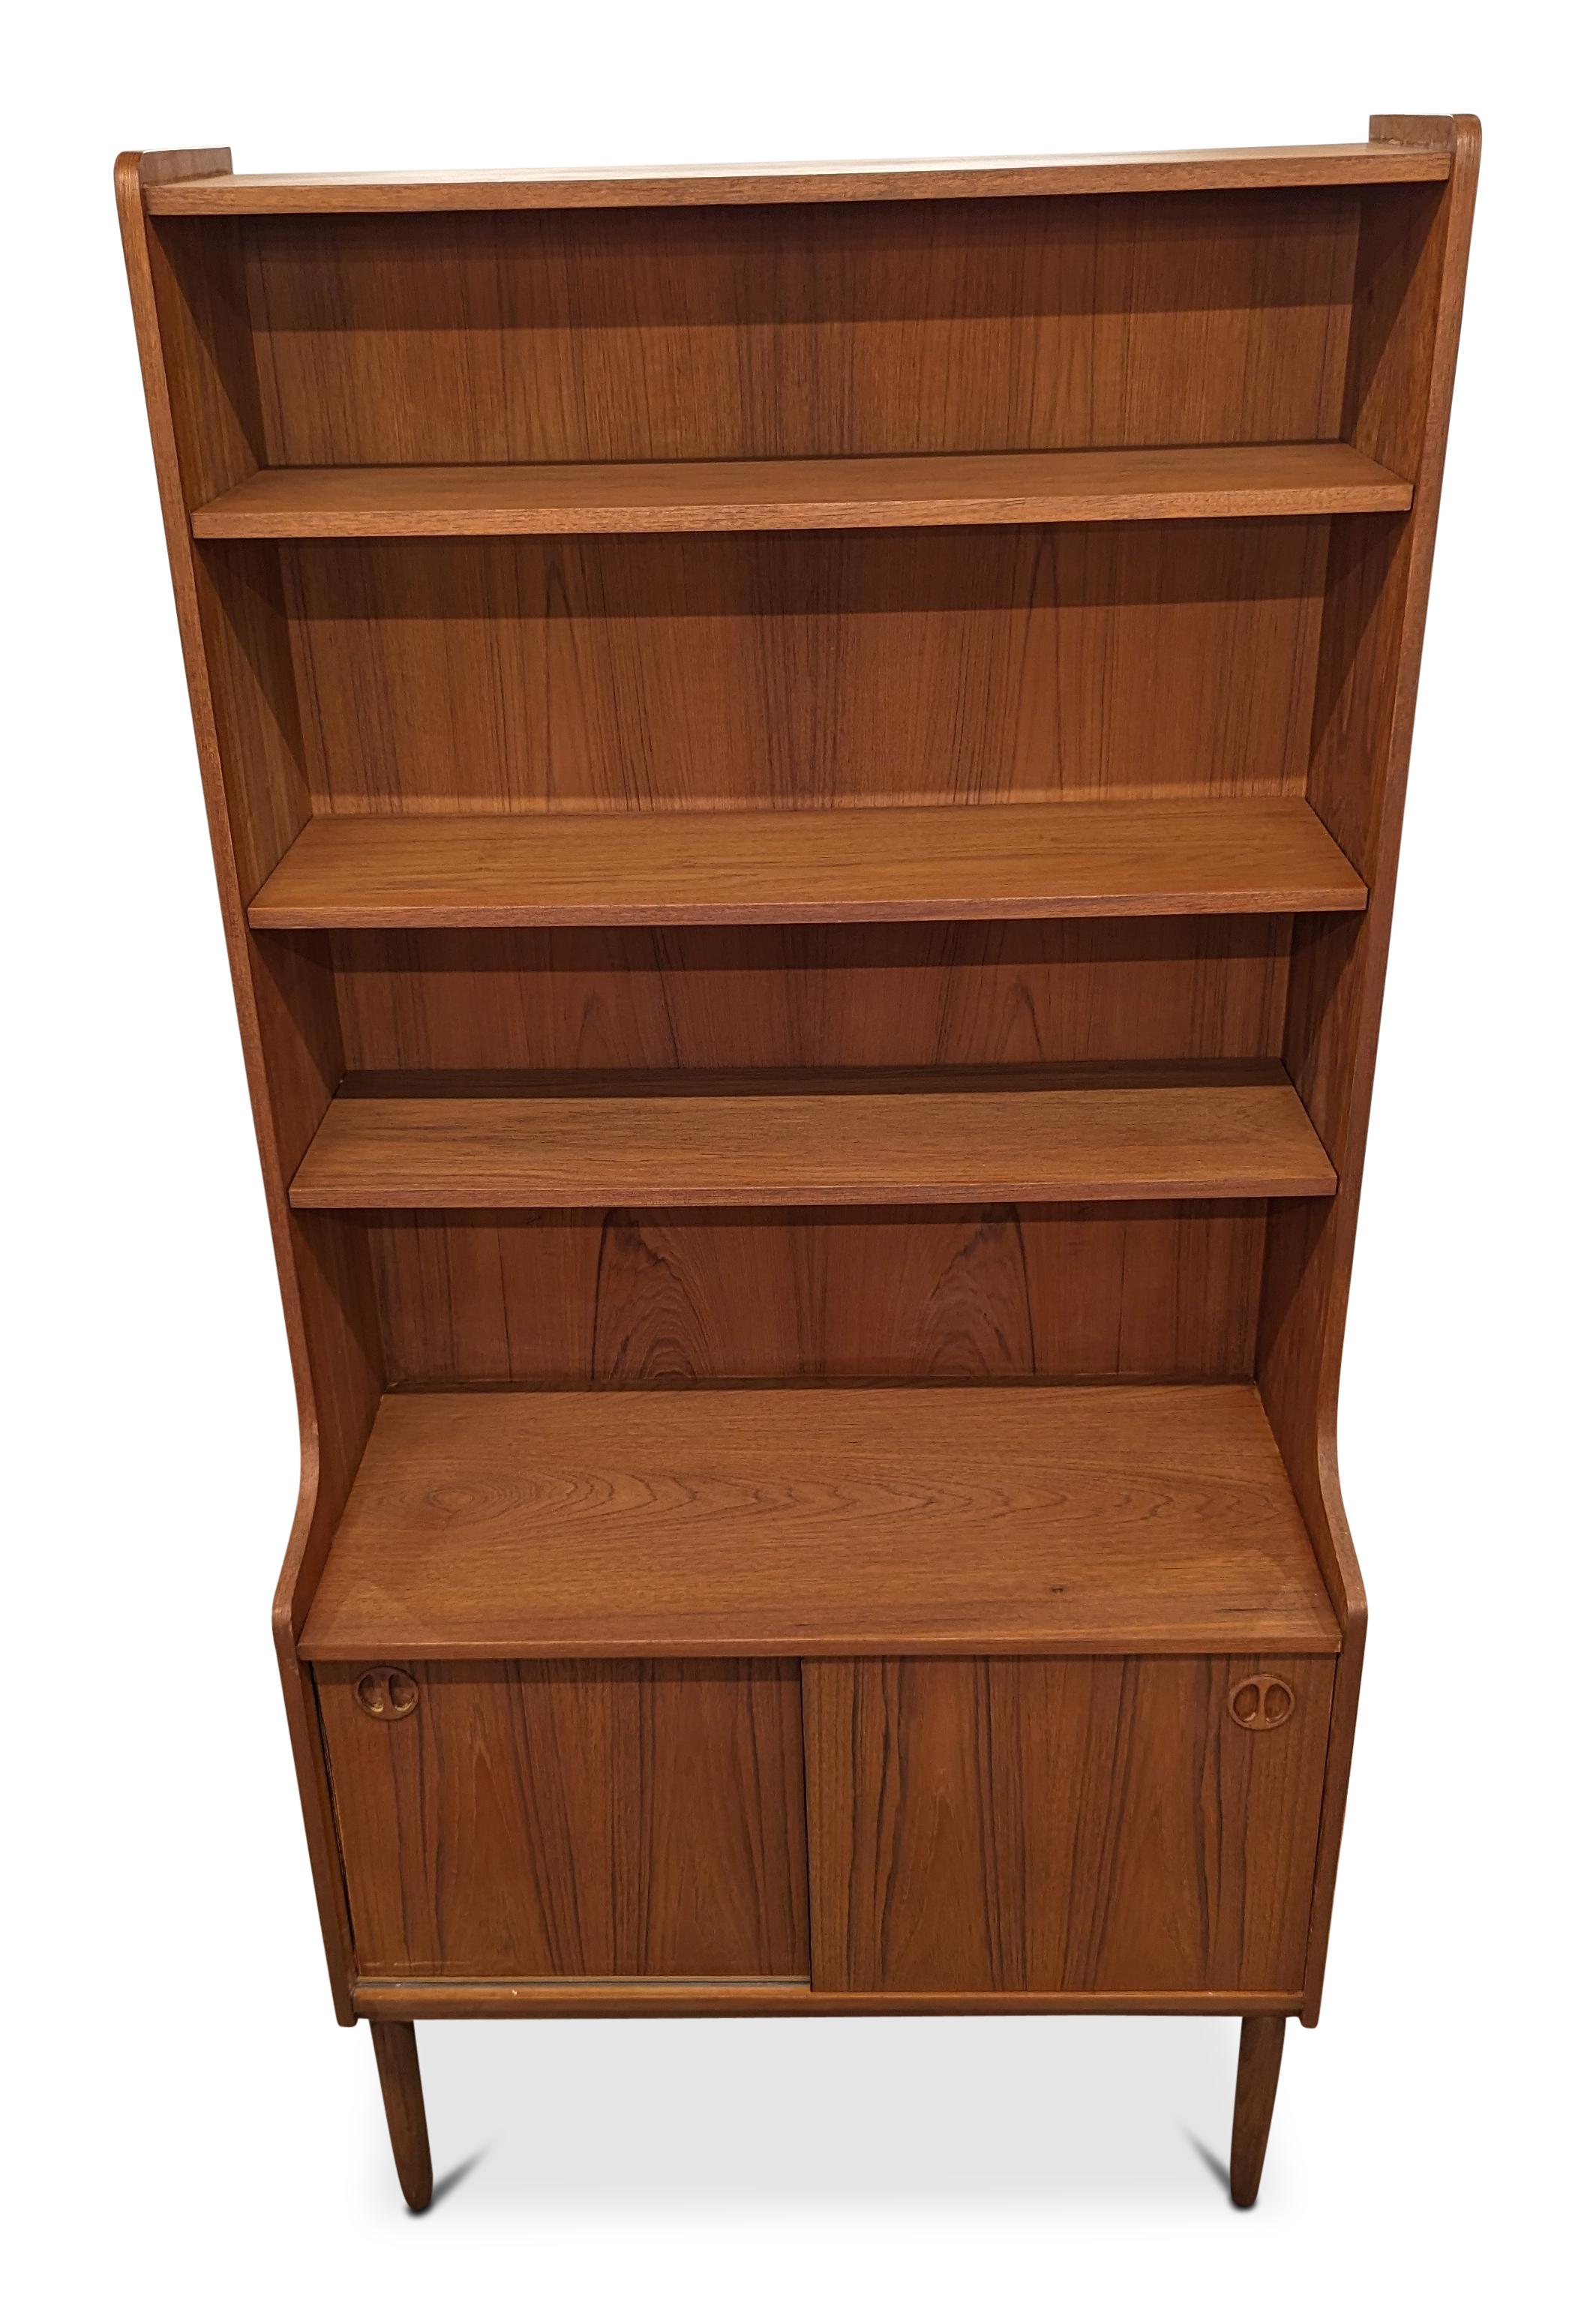 Vintage Danish Mid Century Teak Bookcase - 022403 In Good Condition For Sale In Brooklyn, NY